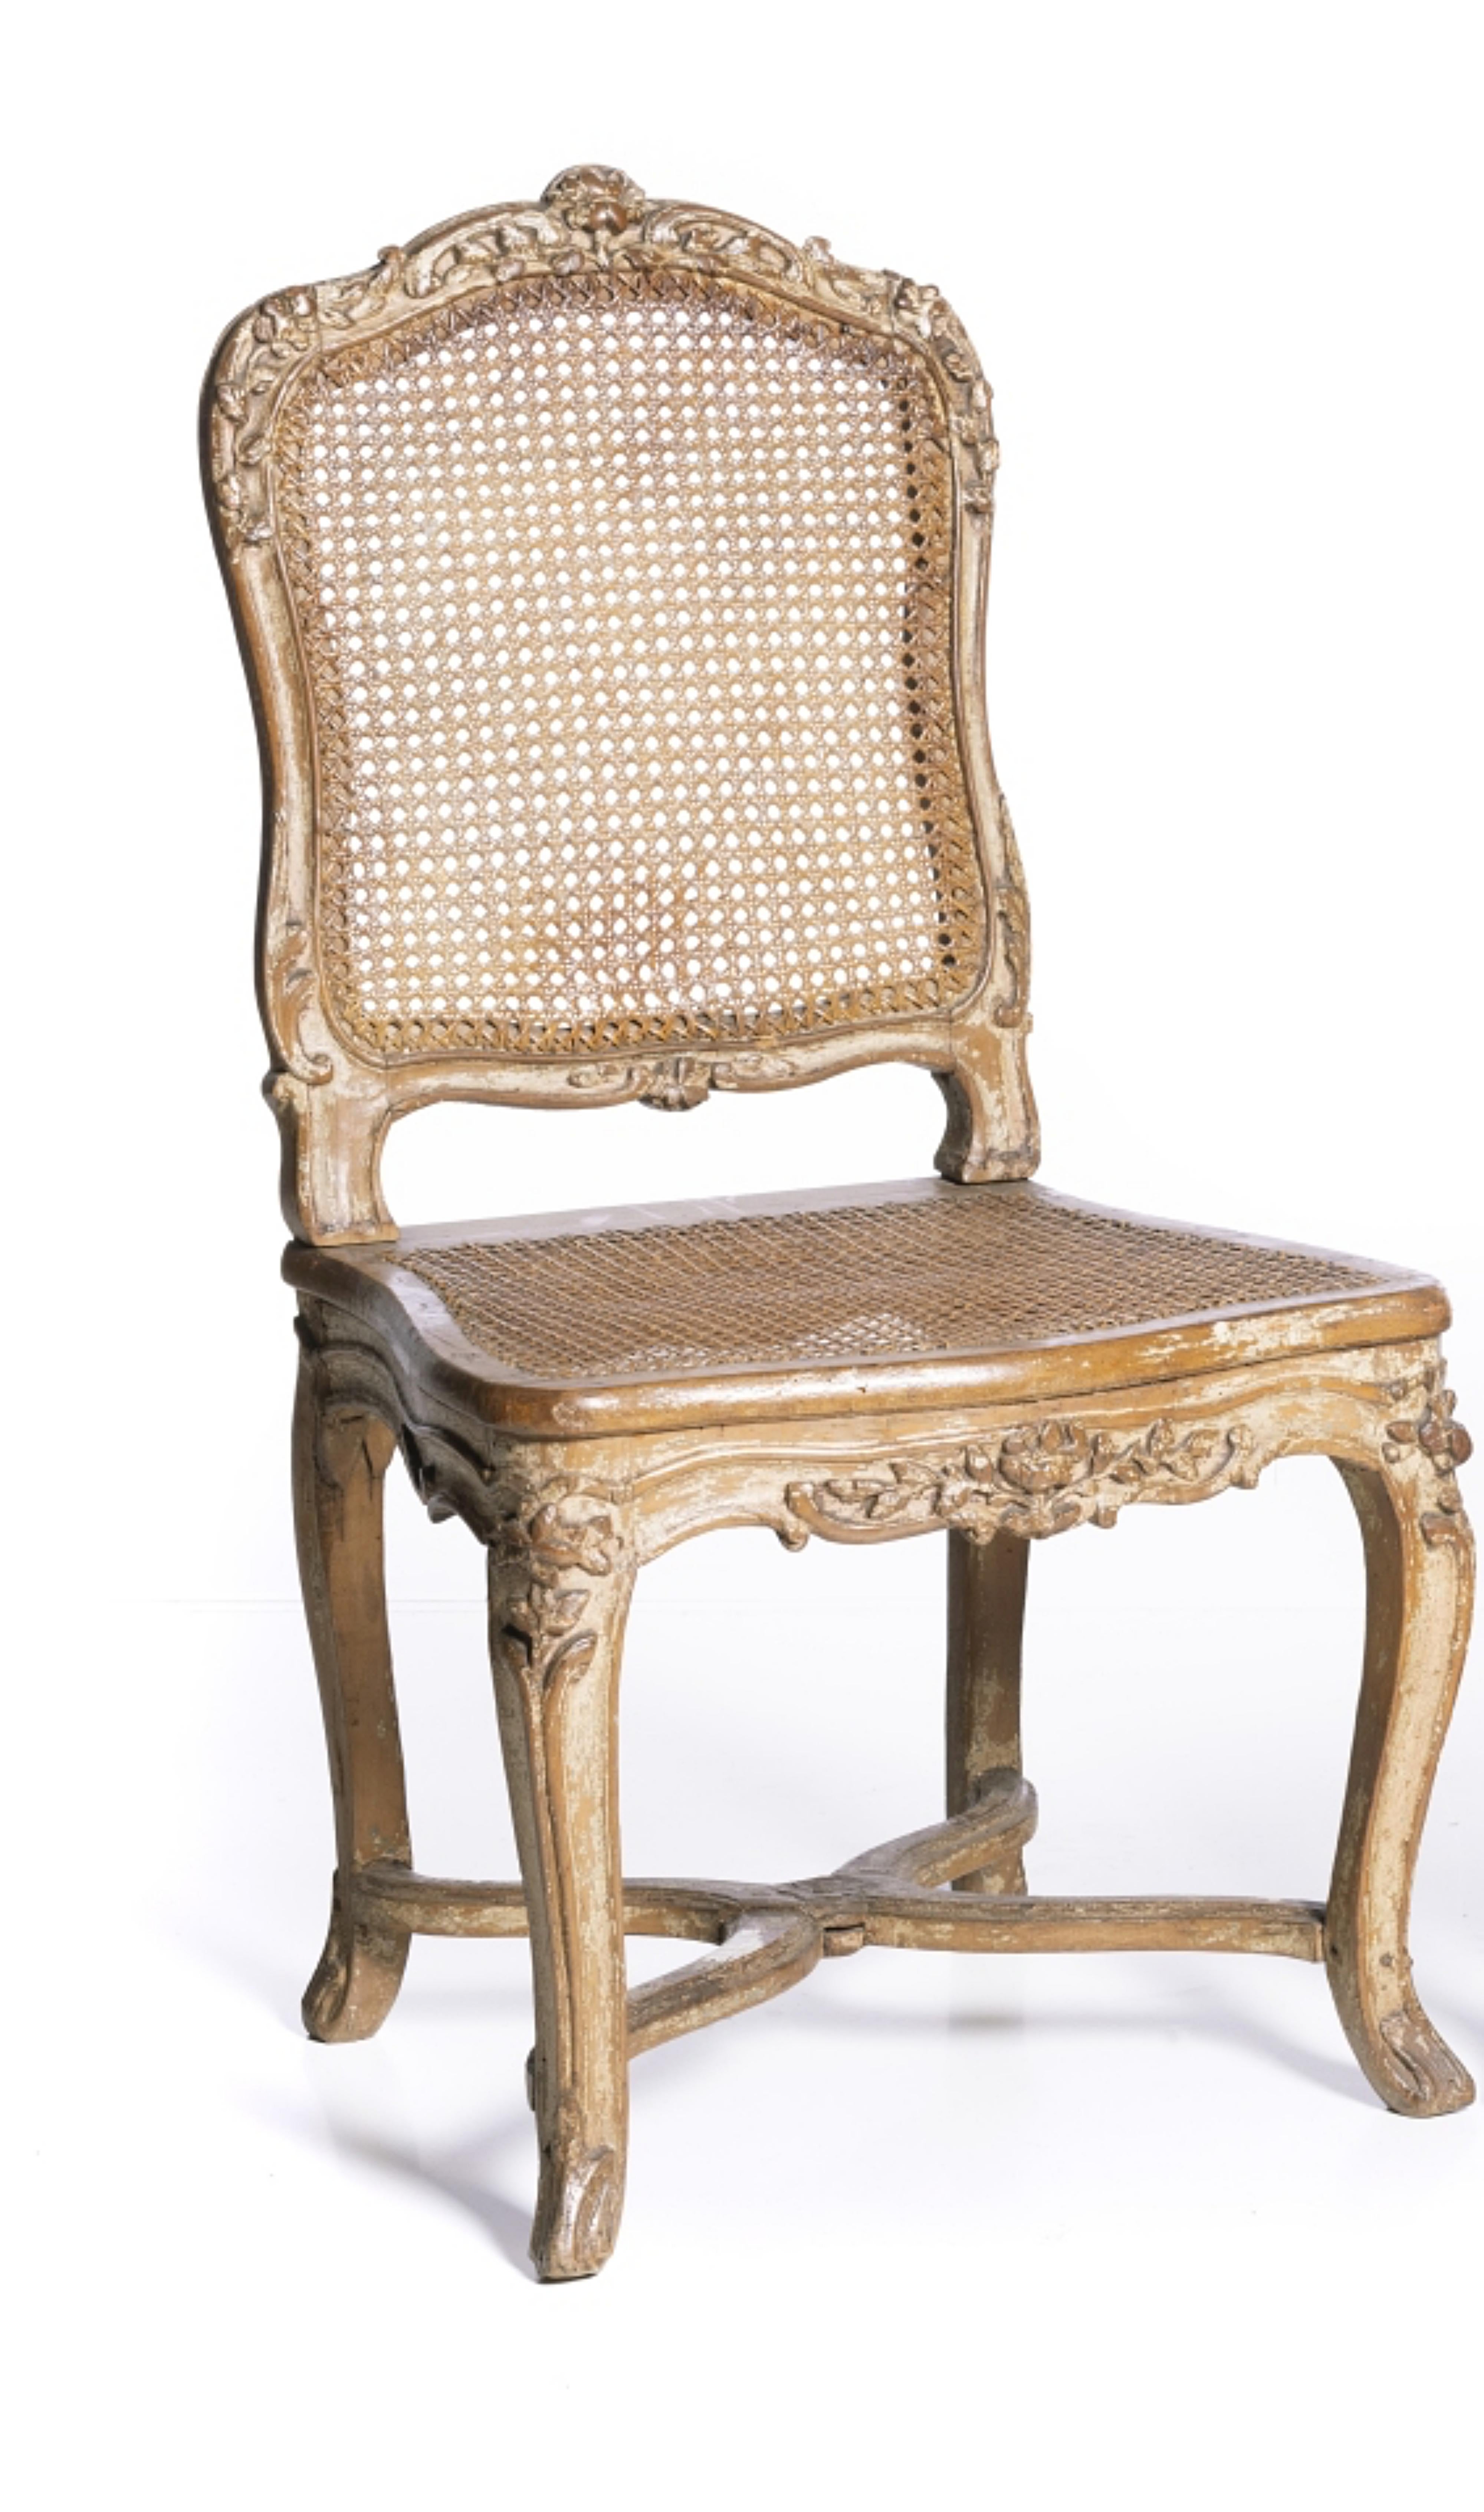 vintage louis xv chairs